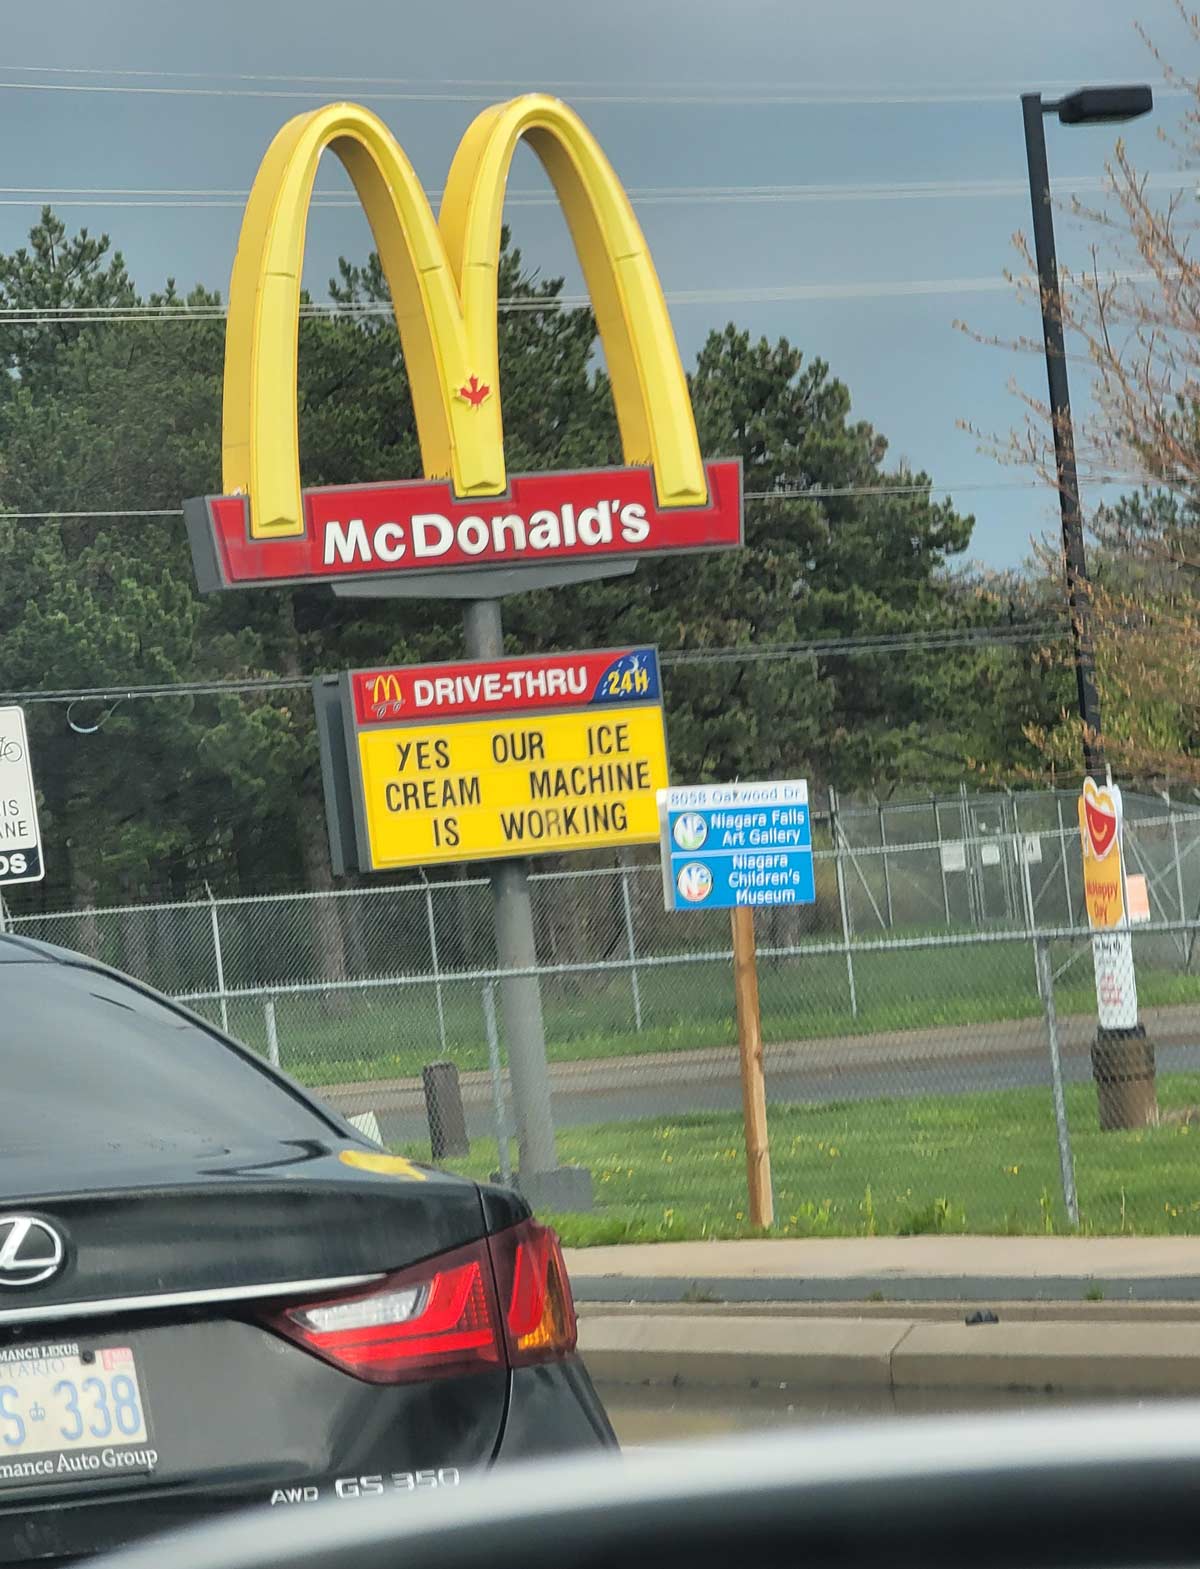 Mcdonald's by my house had this up today